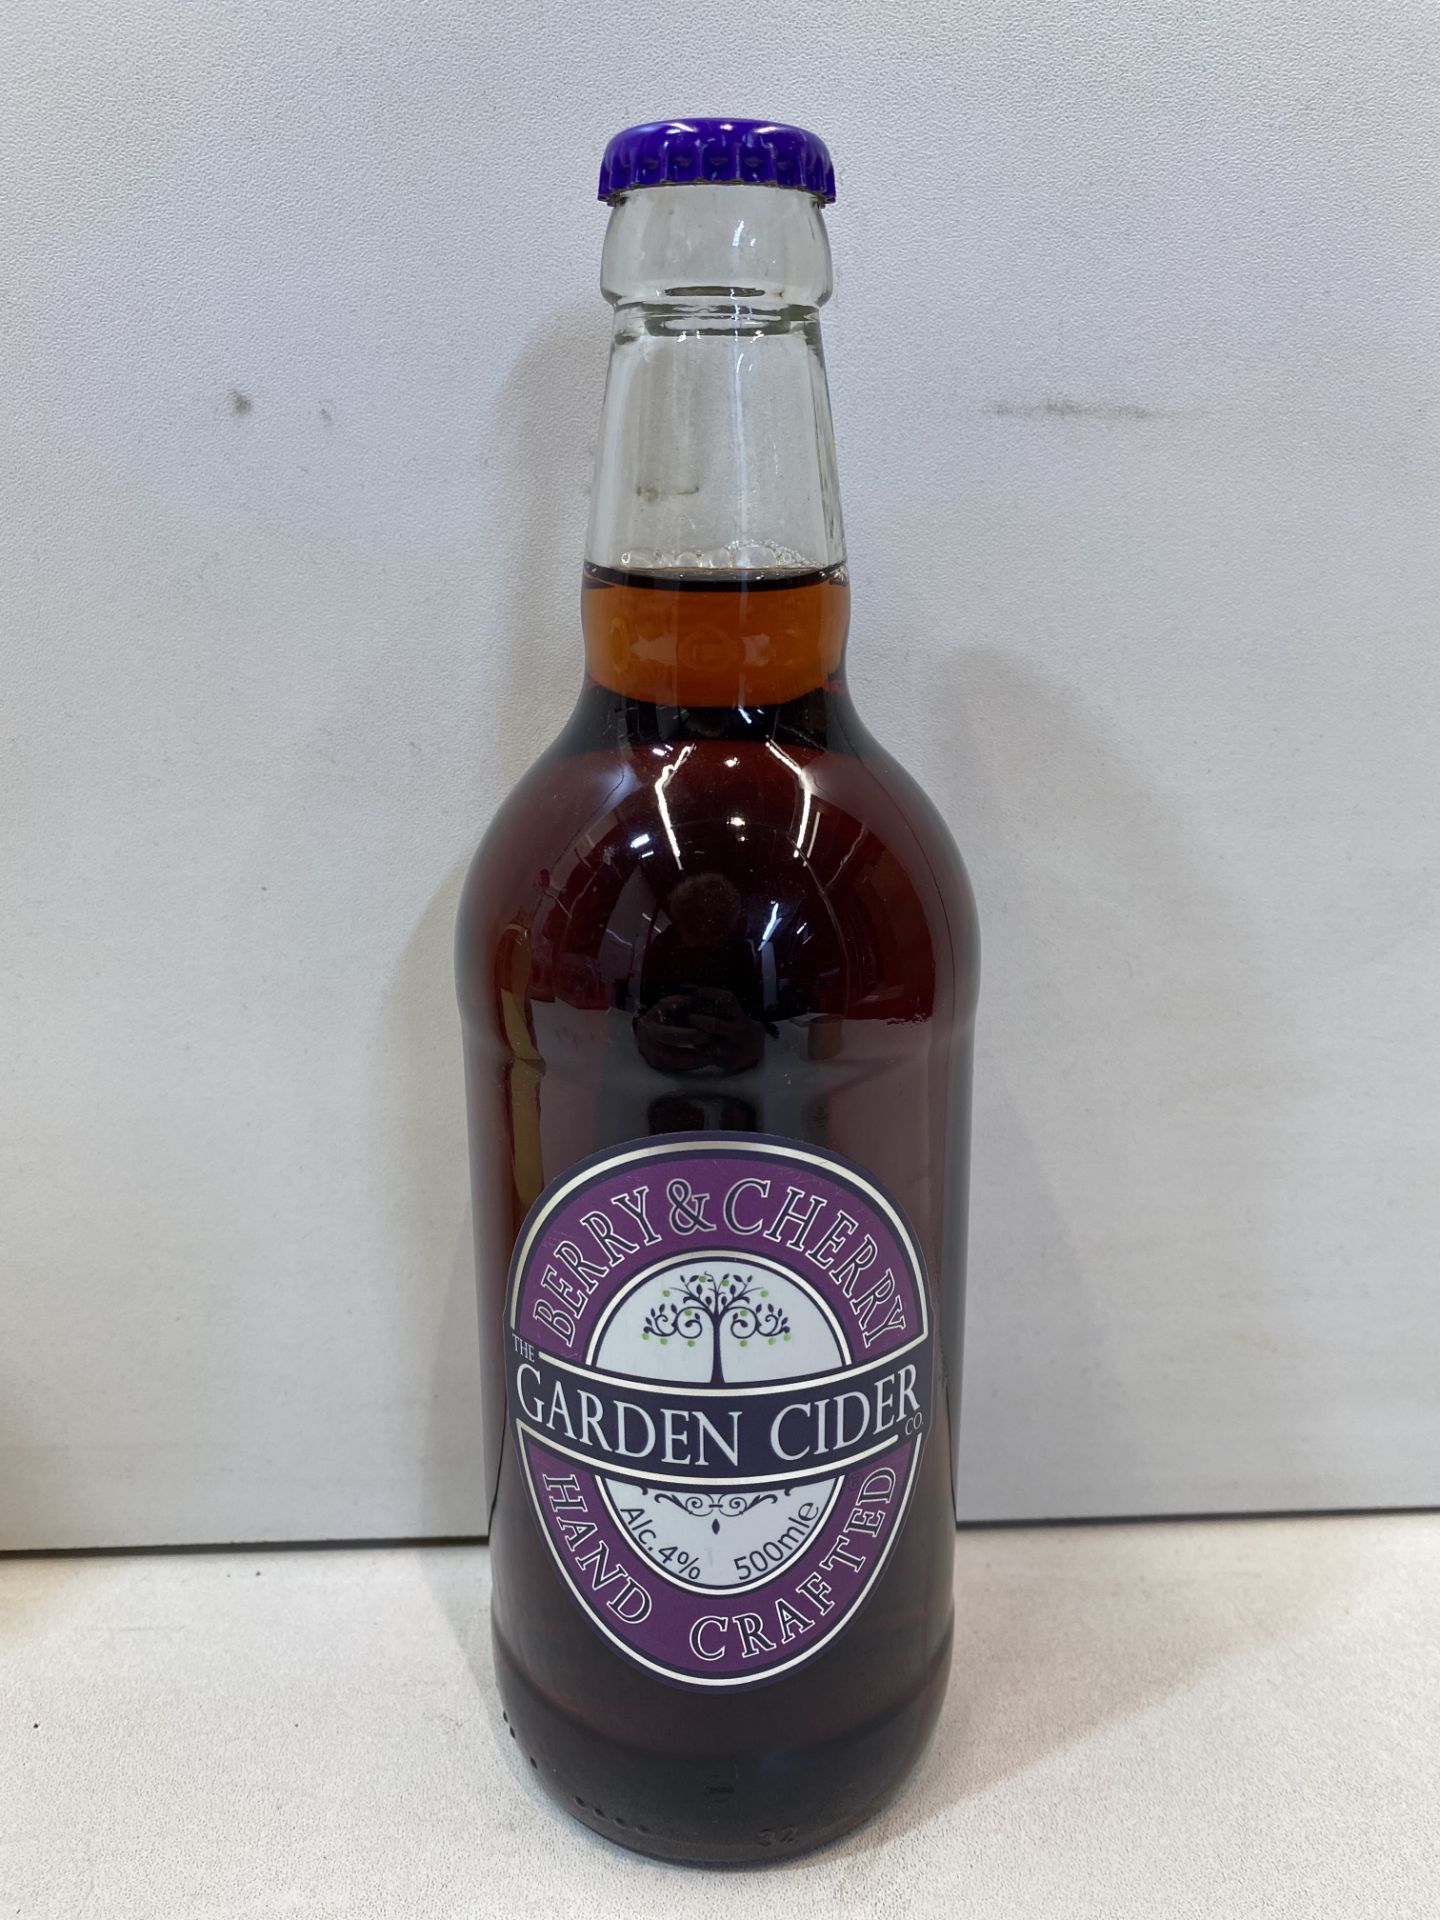 20 x Bottles Of Various The Garden Cider Company Ciders - OUT OF DATE - Best Before 03/22 See Photos - Image 3 of 3